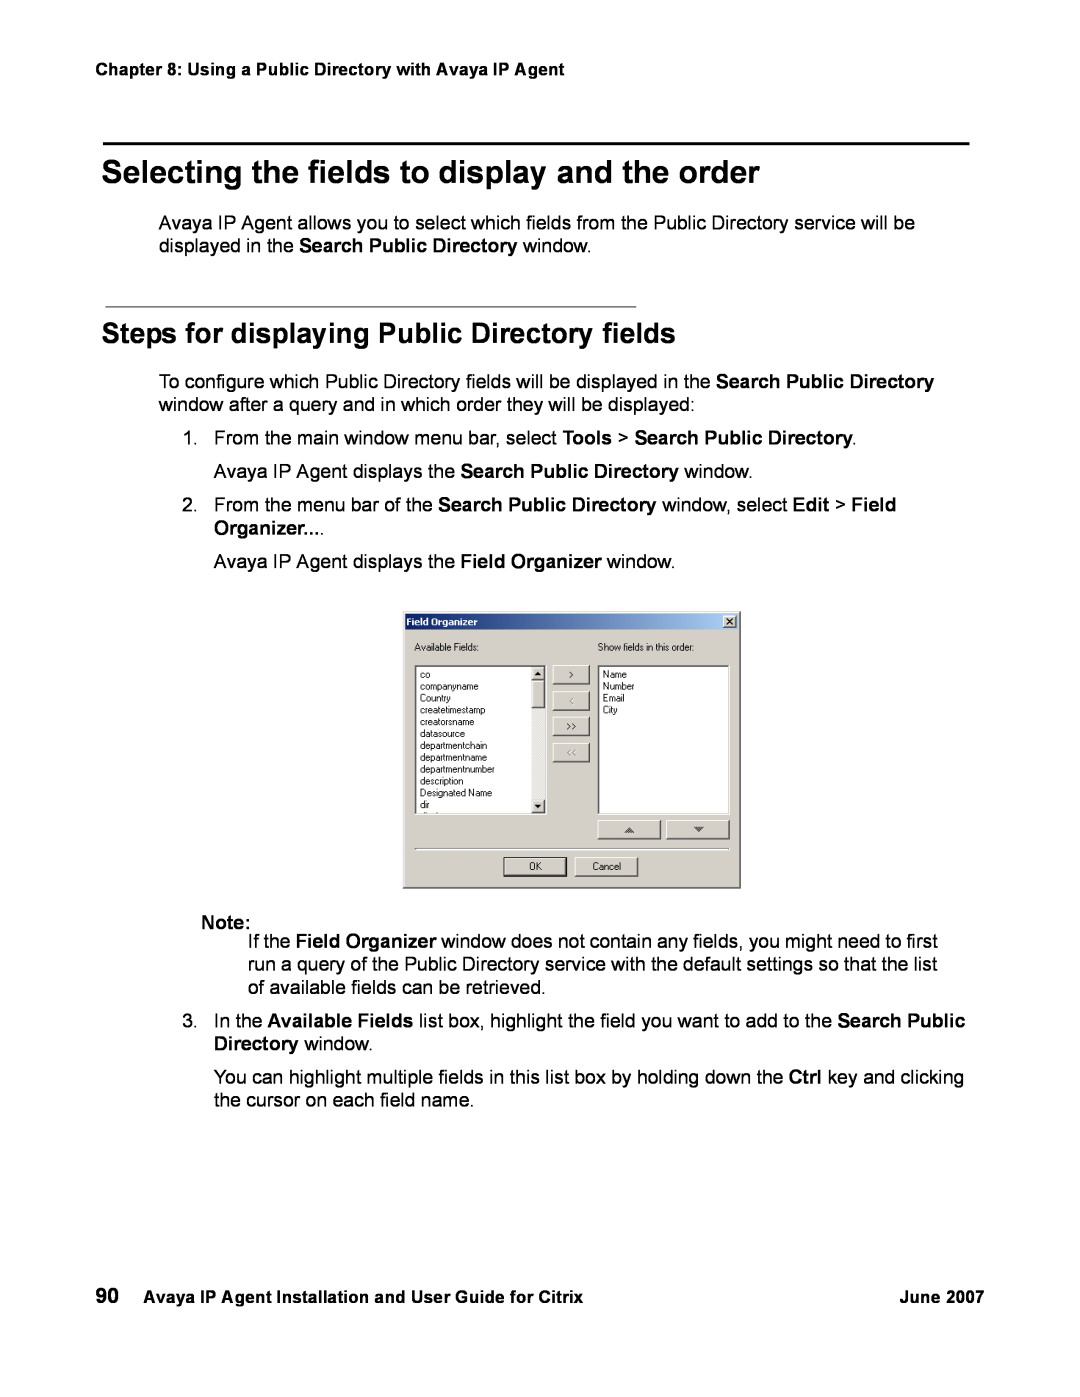 Avaya 7 manual Selecting the fields to display and the order, Steps for displaying Public Directory fields 